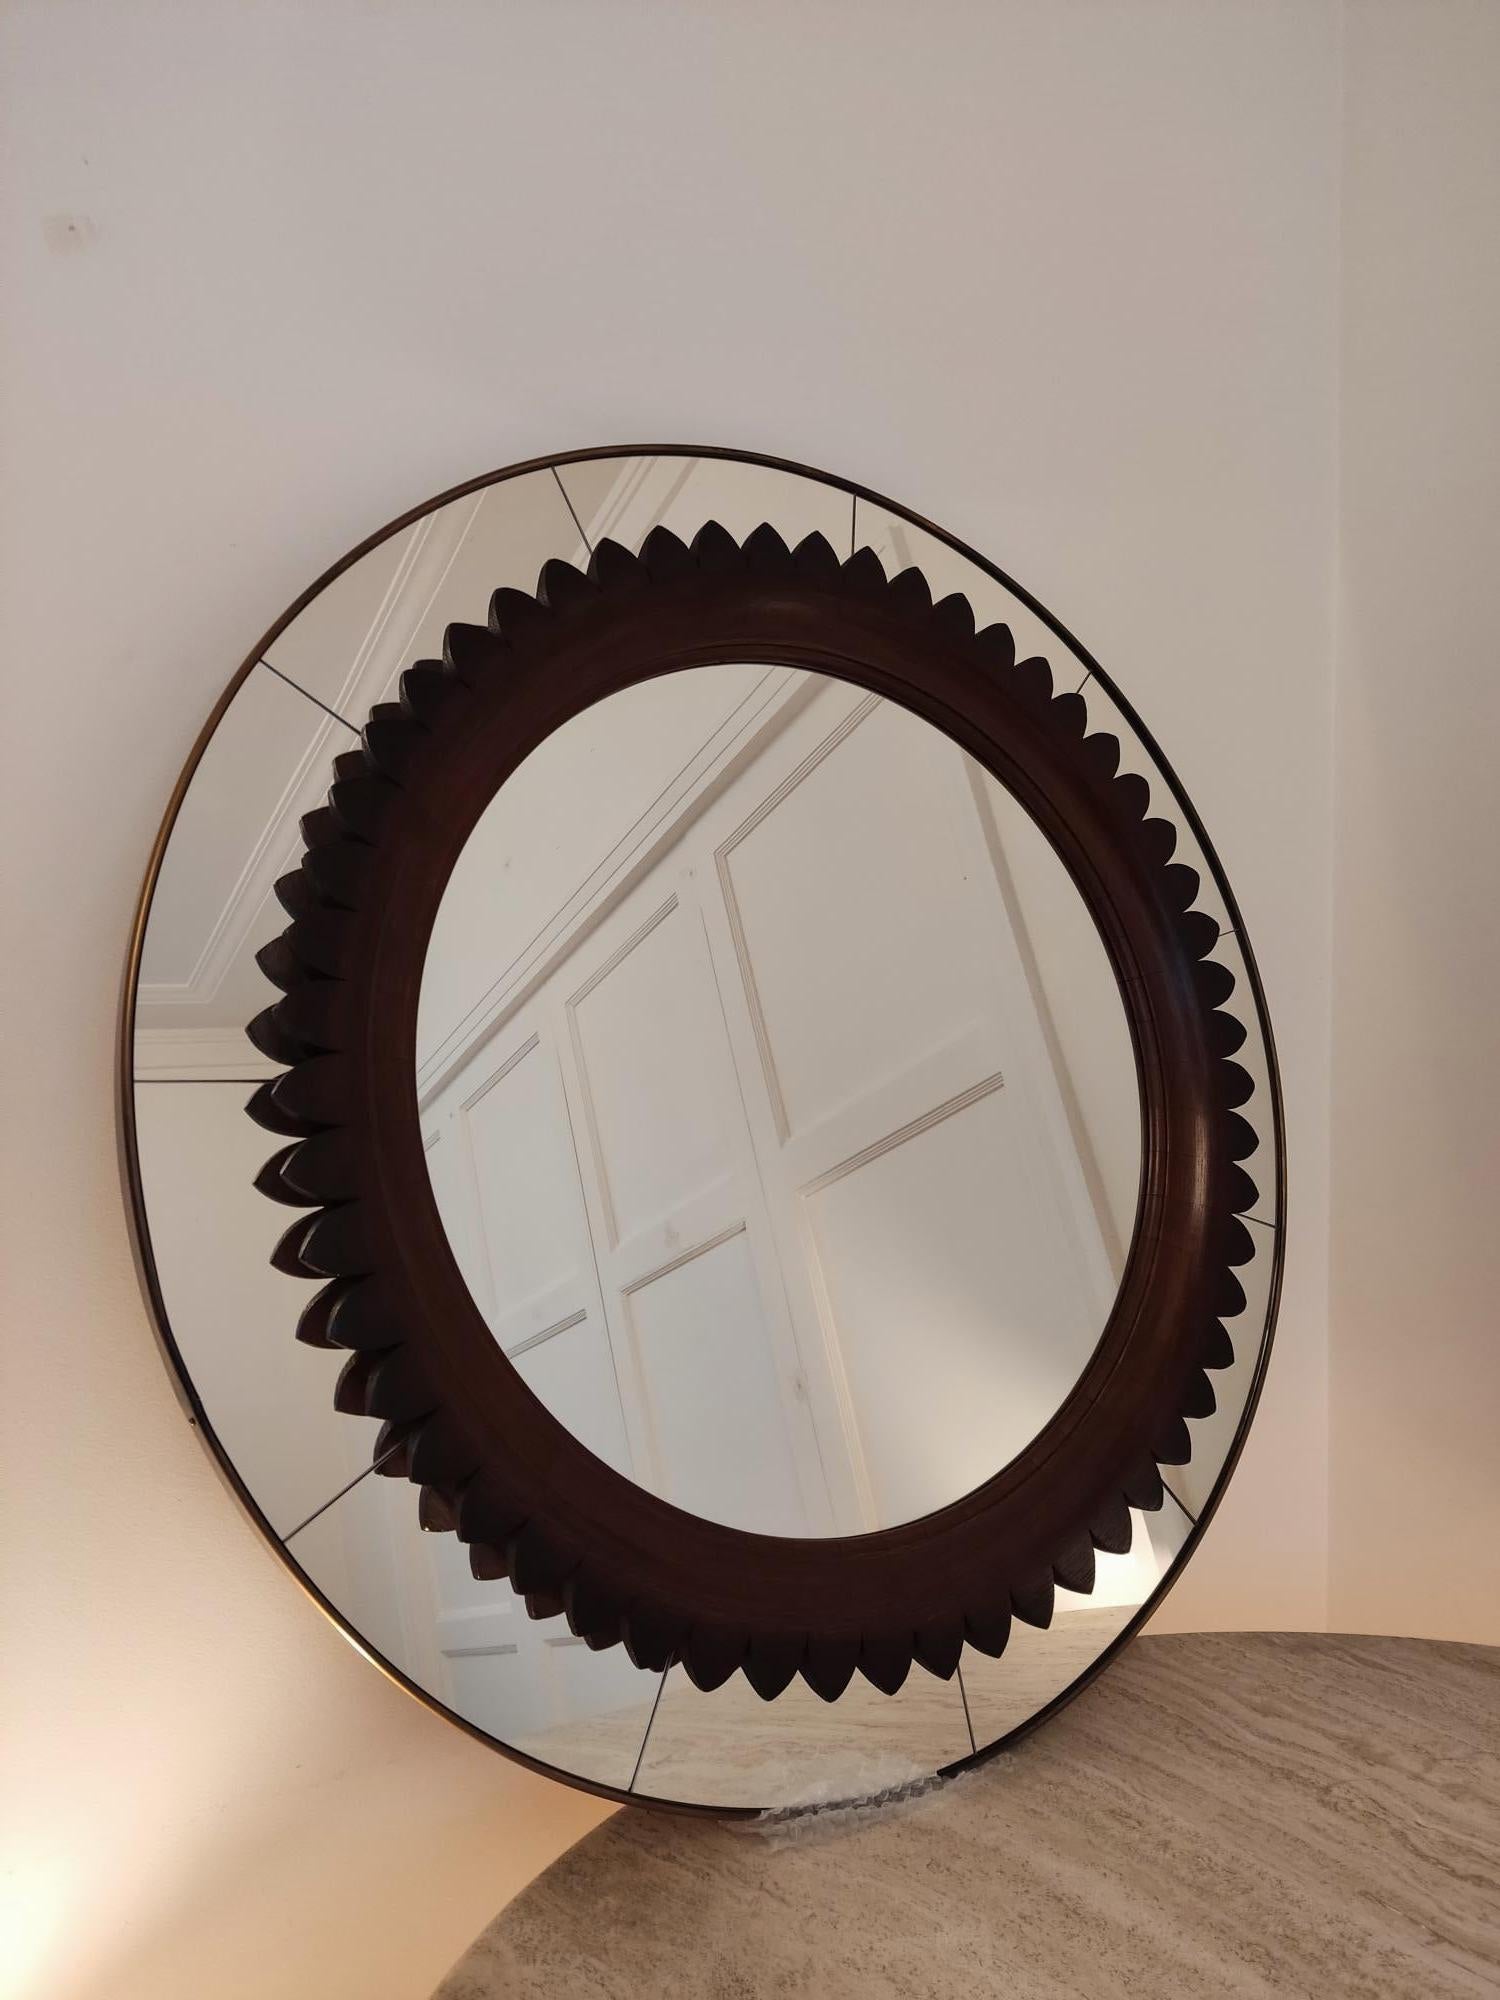 Magnificent Italian wall mirror designed in the 60s by Fratelli Marelli. This mirror has the particularity of having a double frame, the outermost is made of brass. The second has wonderful details, including the scalloped walnut interior circular